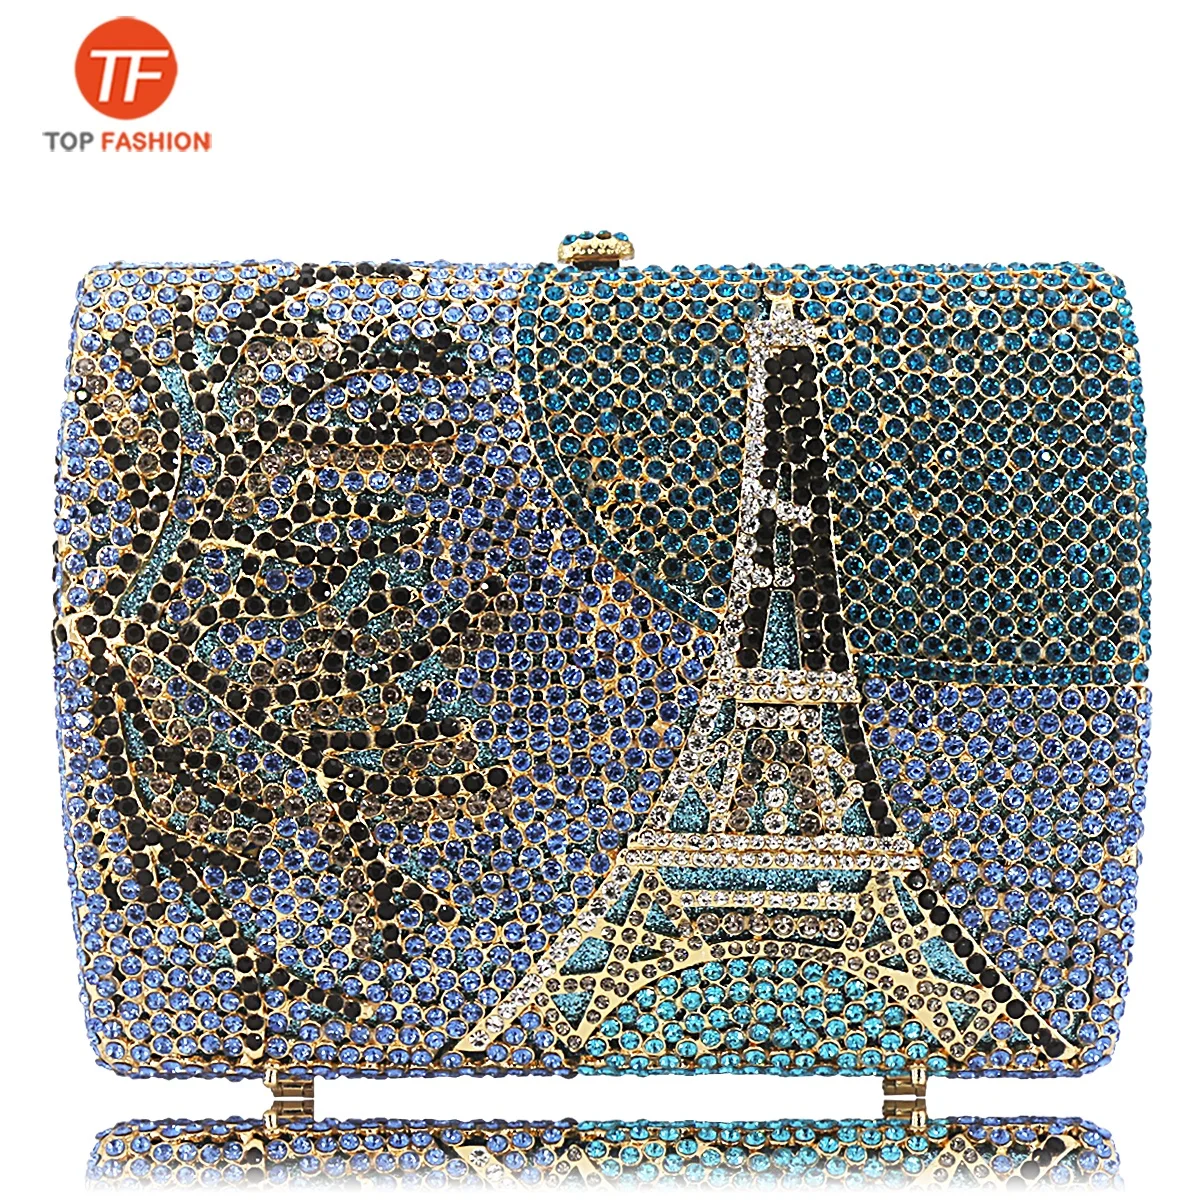 

Luxury Crystal Rhinestone Clutch Purse Eiffel Tower Evening Bag for Wedding Party Wholesales from China Supplier, ( accept customized )